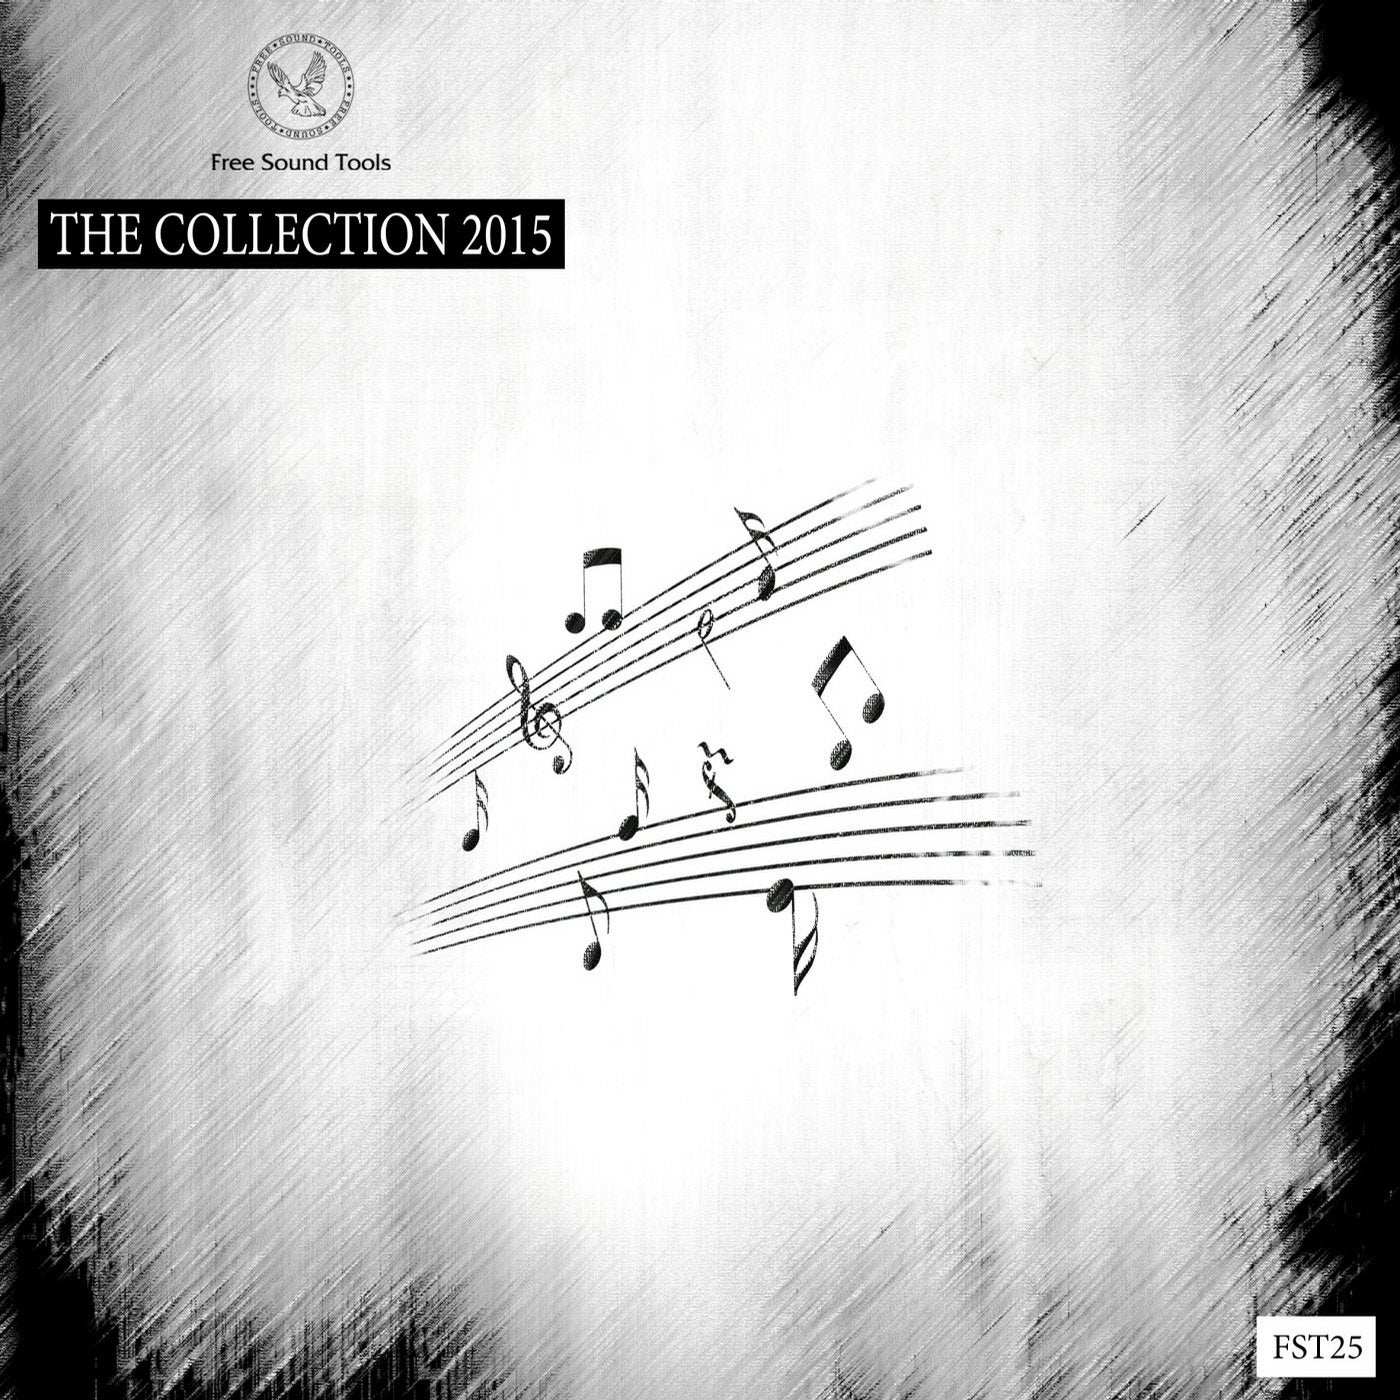 The Collection 2015